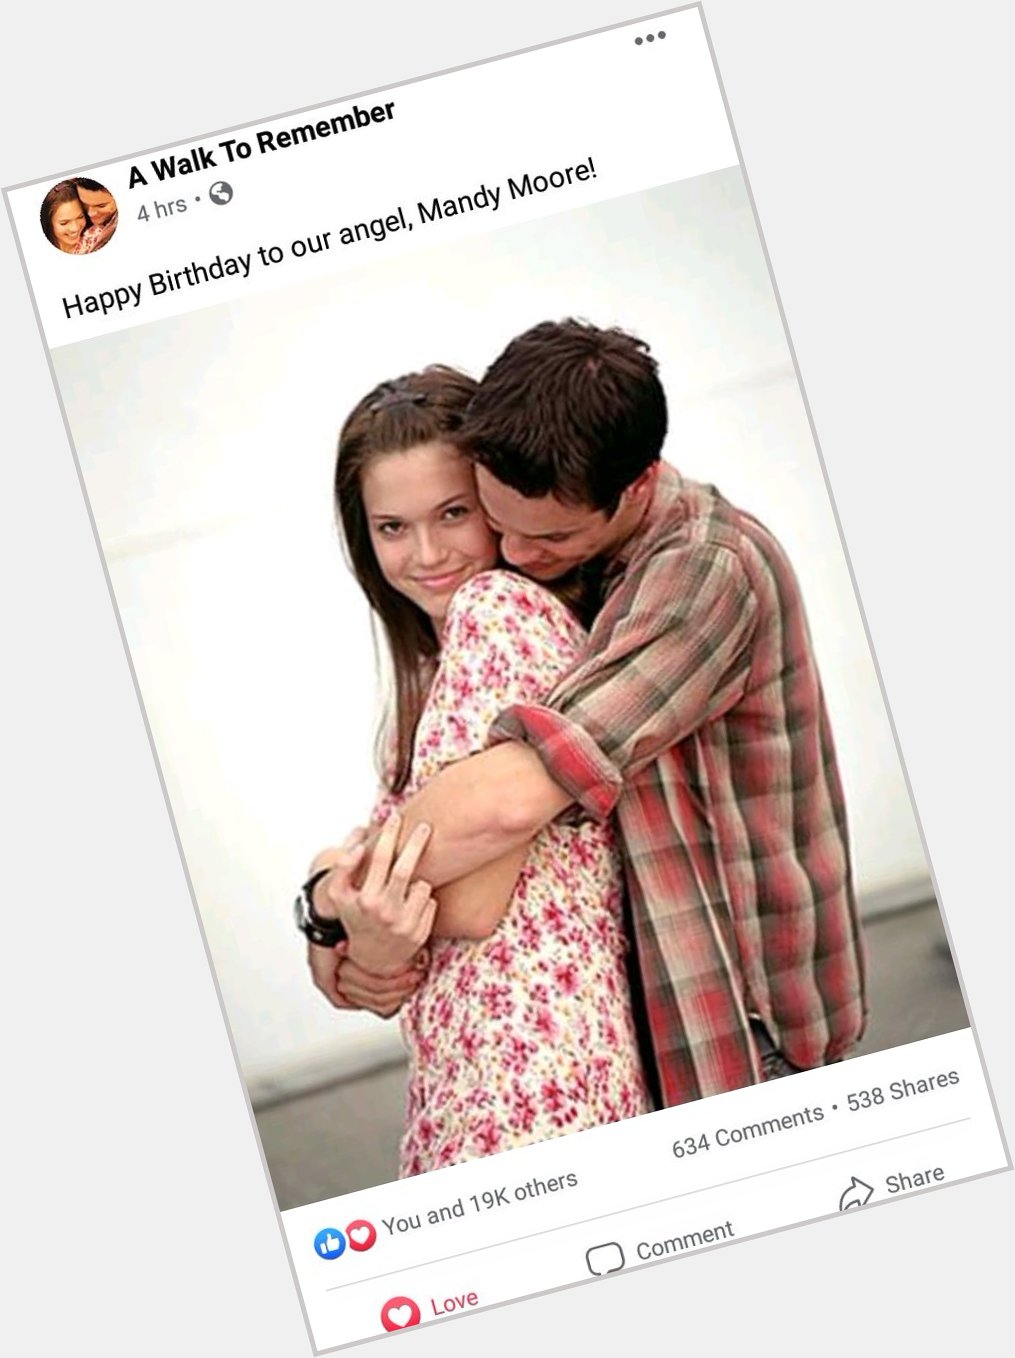 A Walk to Remember One of my all time favorite Movies.   Happy Birthday Ms. Mandy Moore.   © 